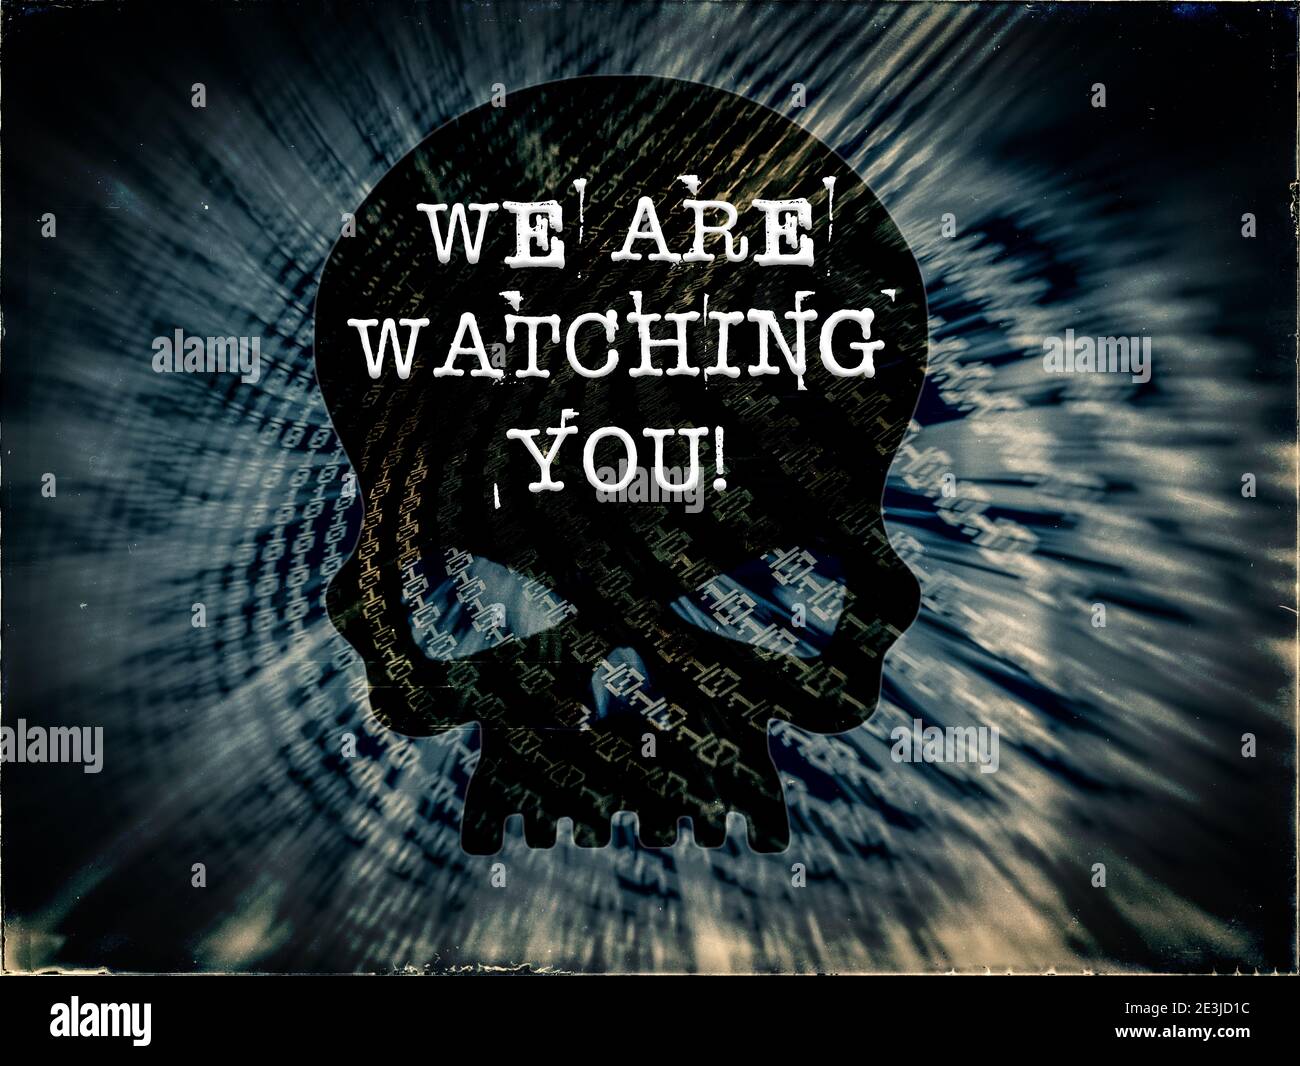 We Are Watching You! text written across Black Skull on Binary code blue background on a vintage distressed looking computer digital display screen Stock Photo